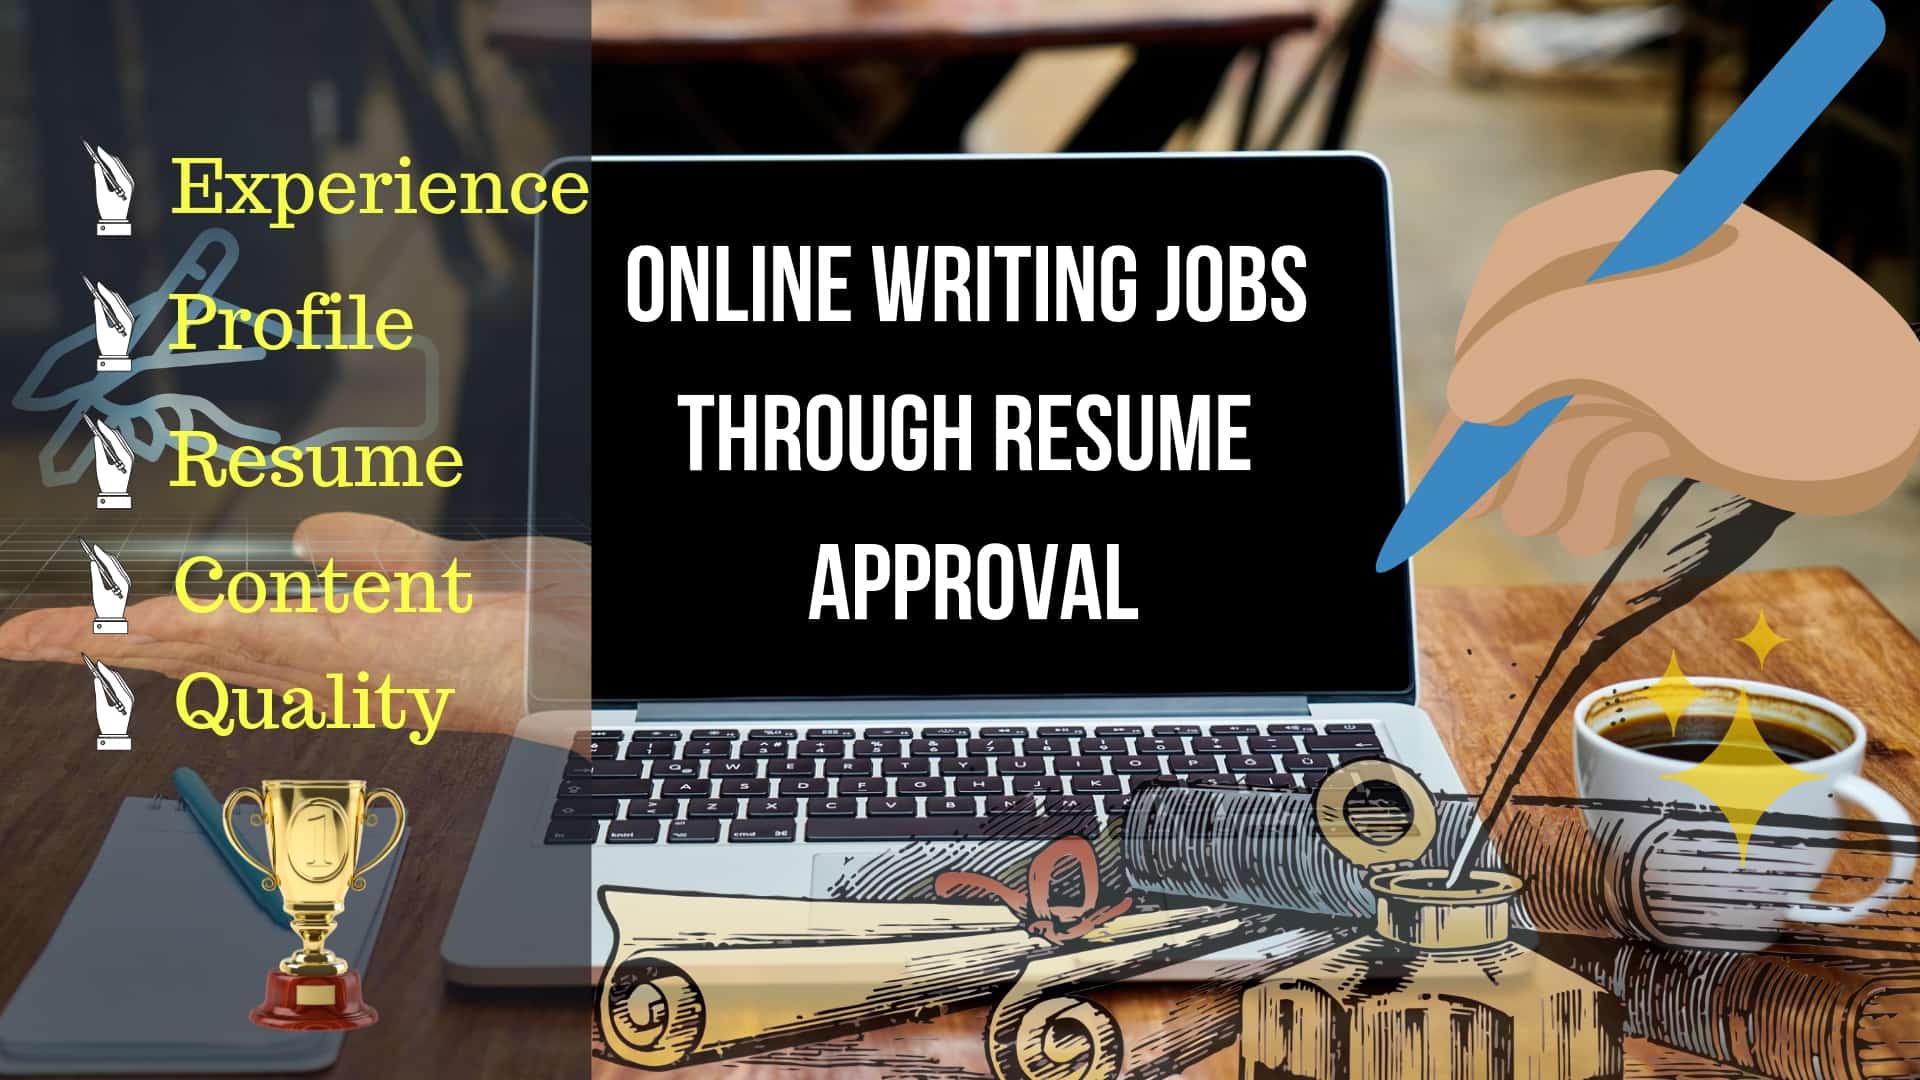 Online writing and social media jobs jobs through resume approval